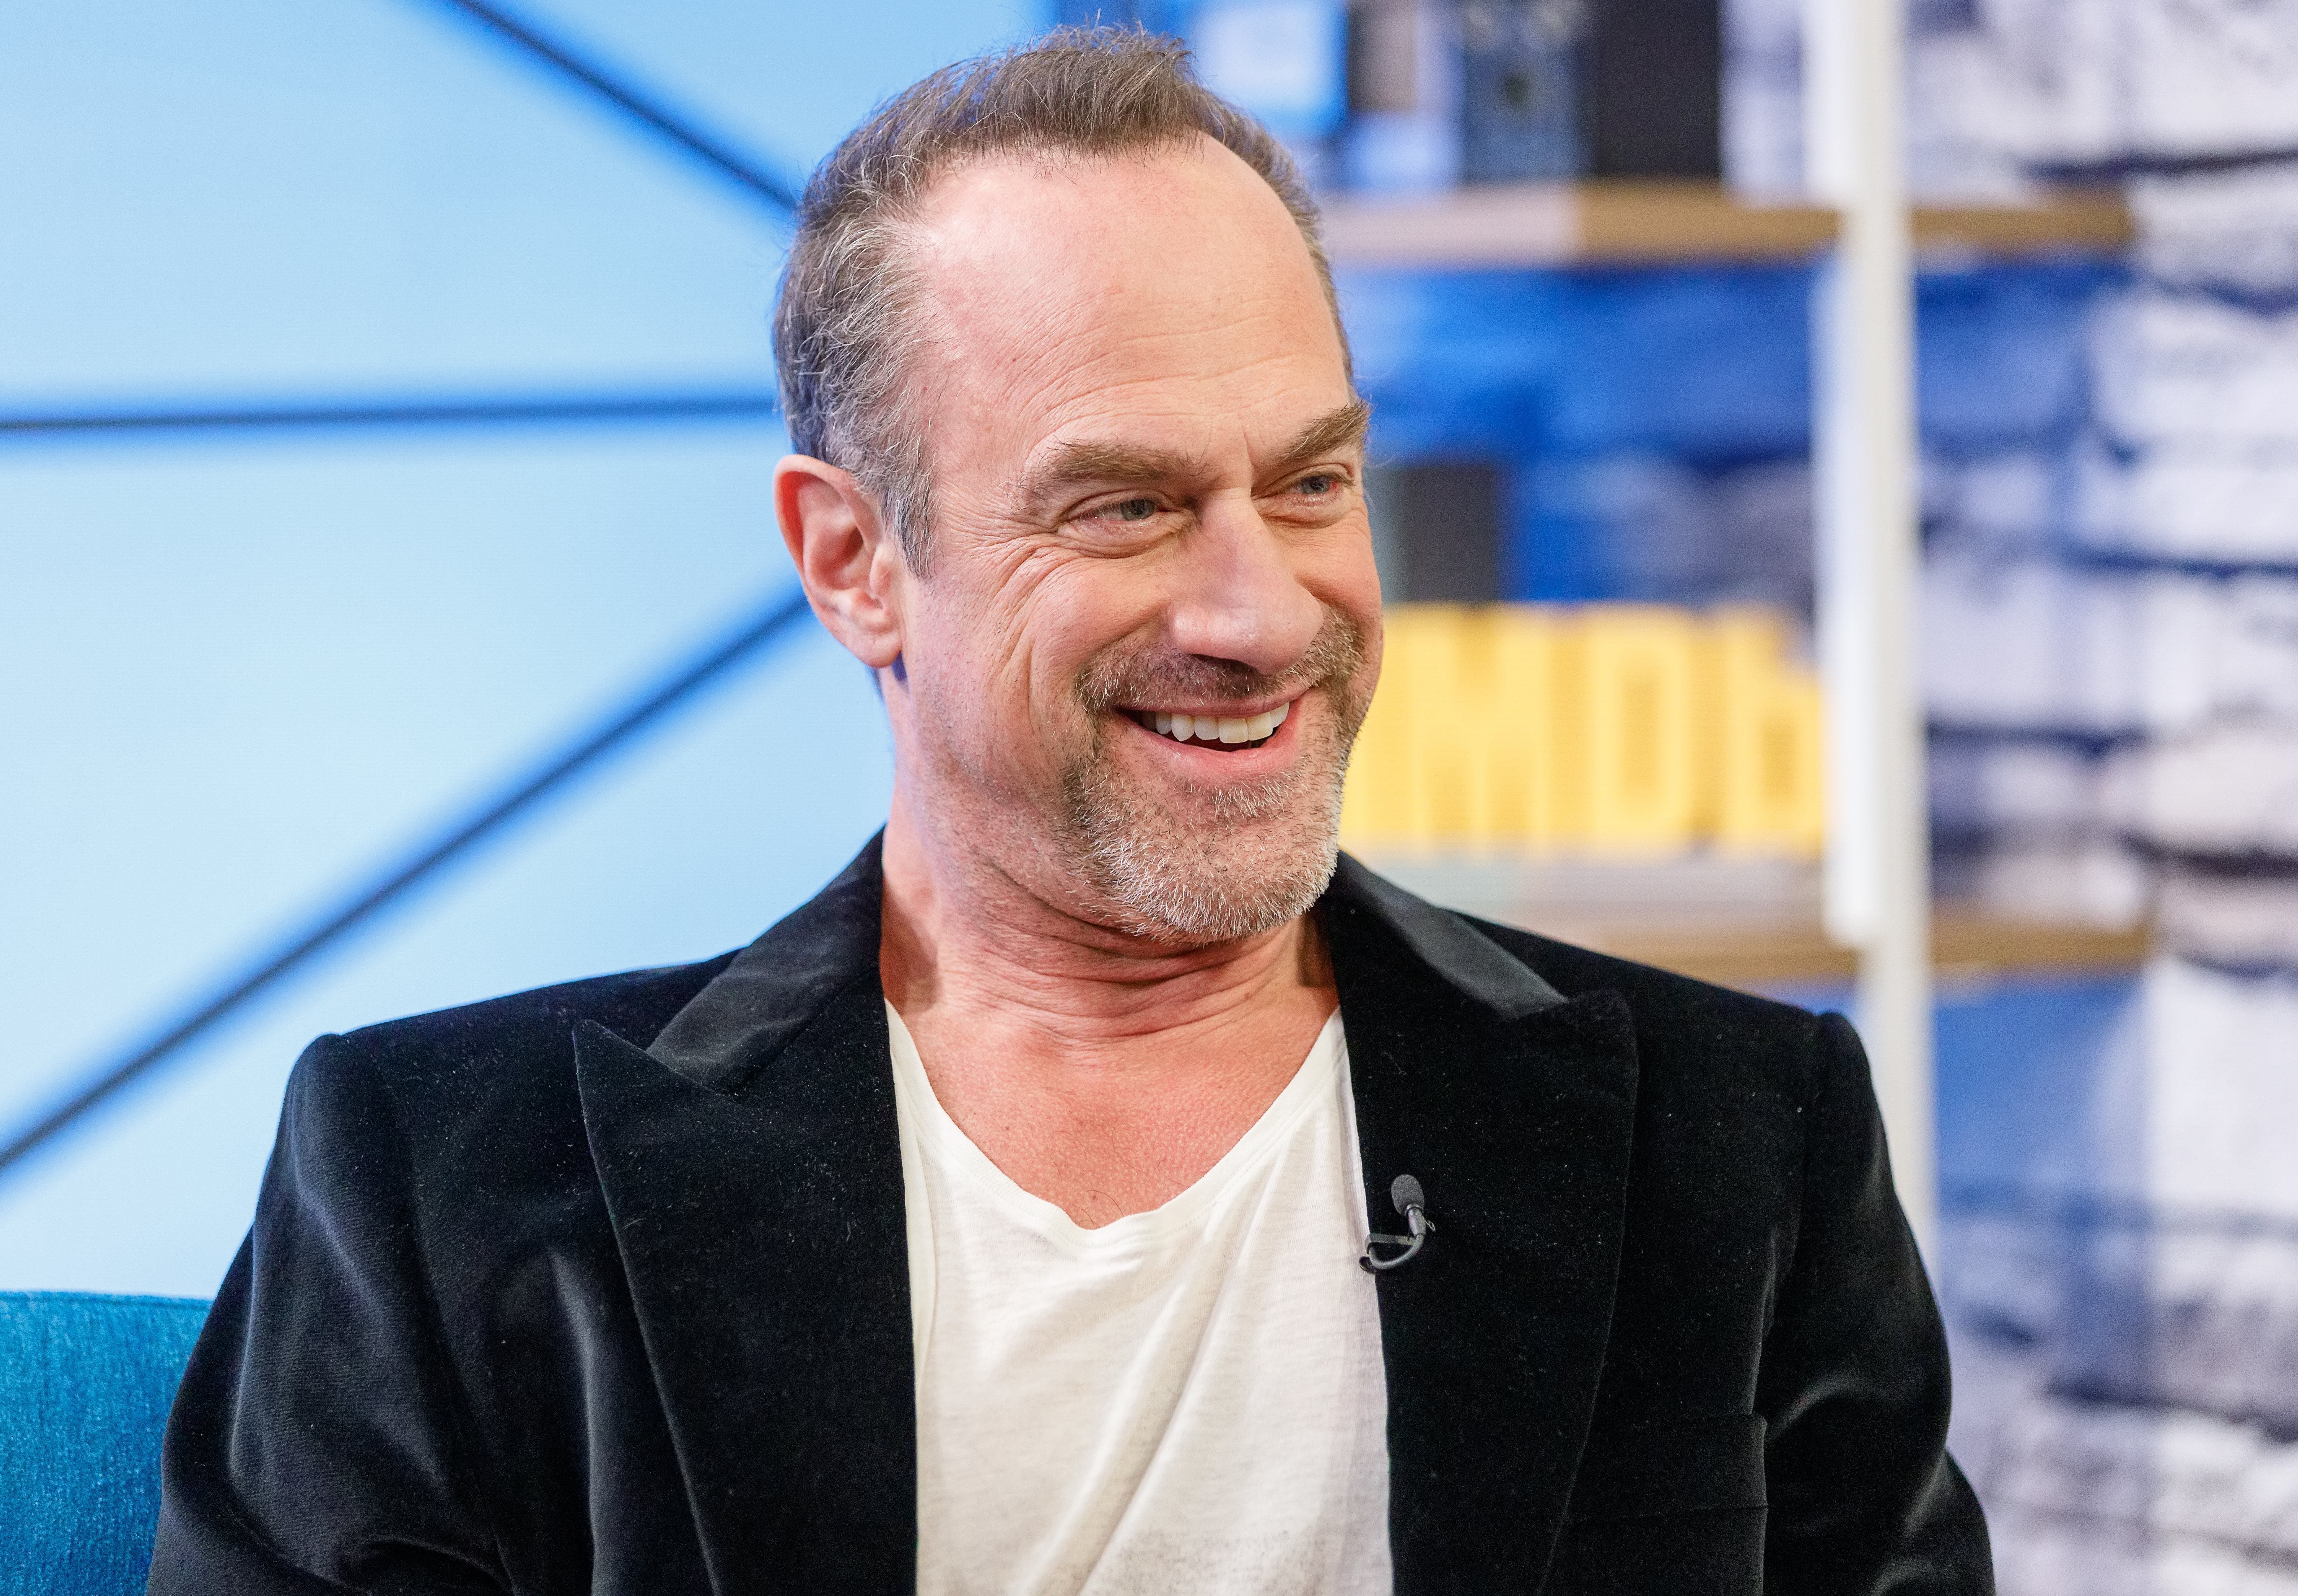 Christopher Meloni visits "The IMDb Show" in Studio City, California on March 26, 2019. | Photo: Getty Images